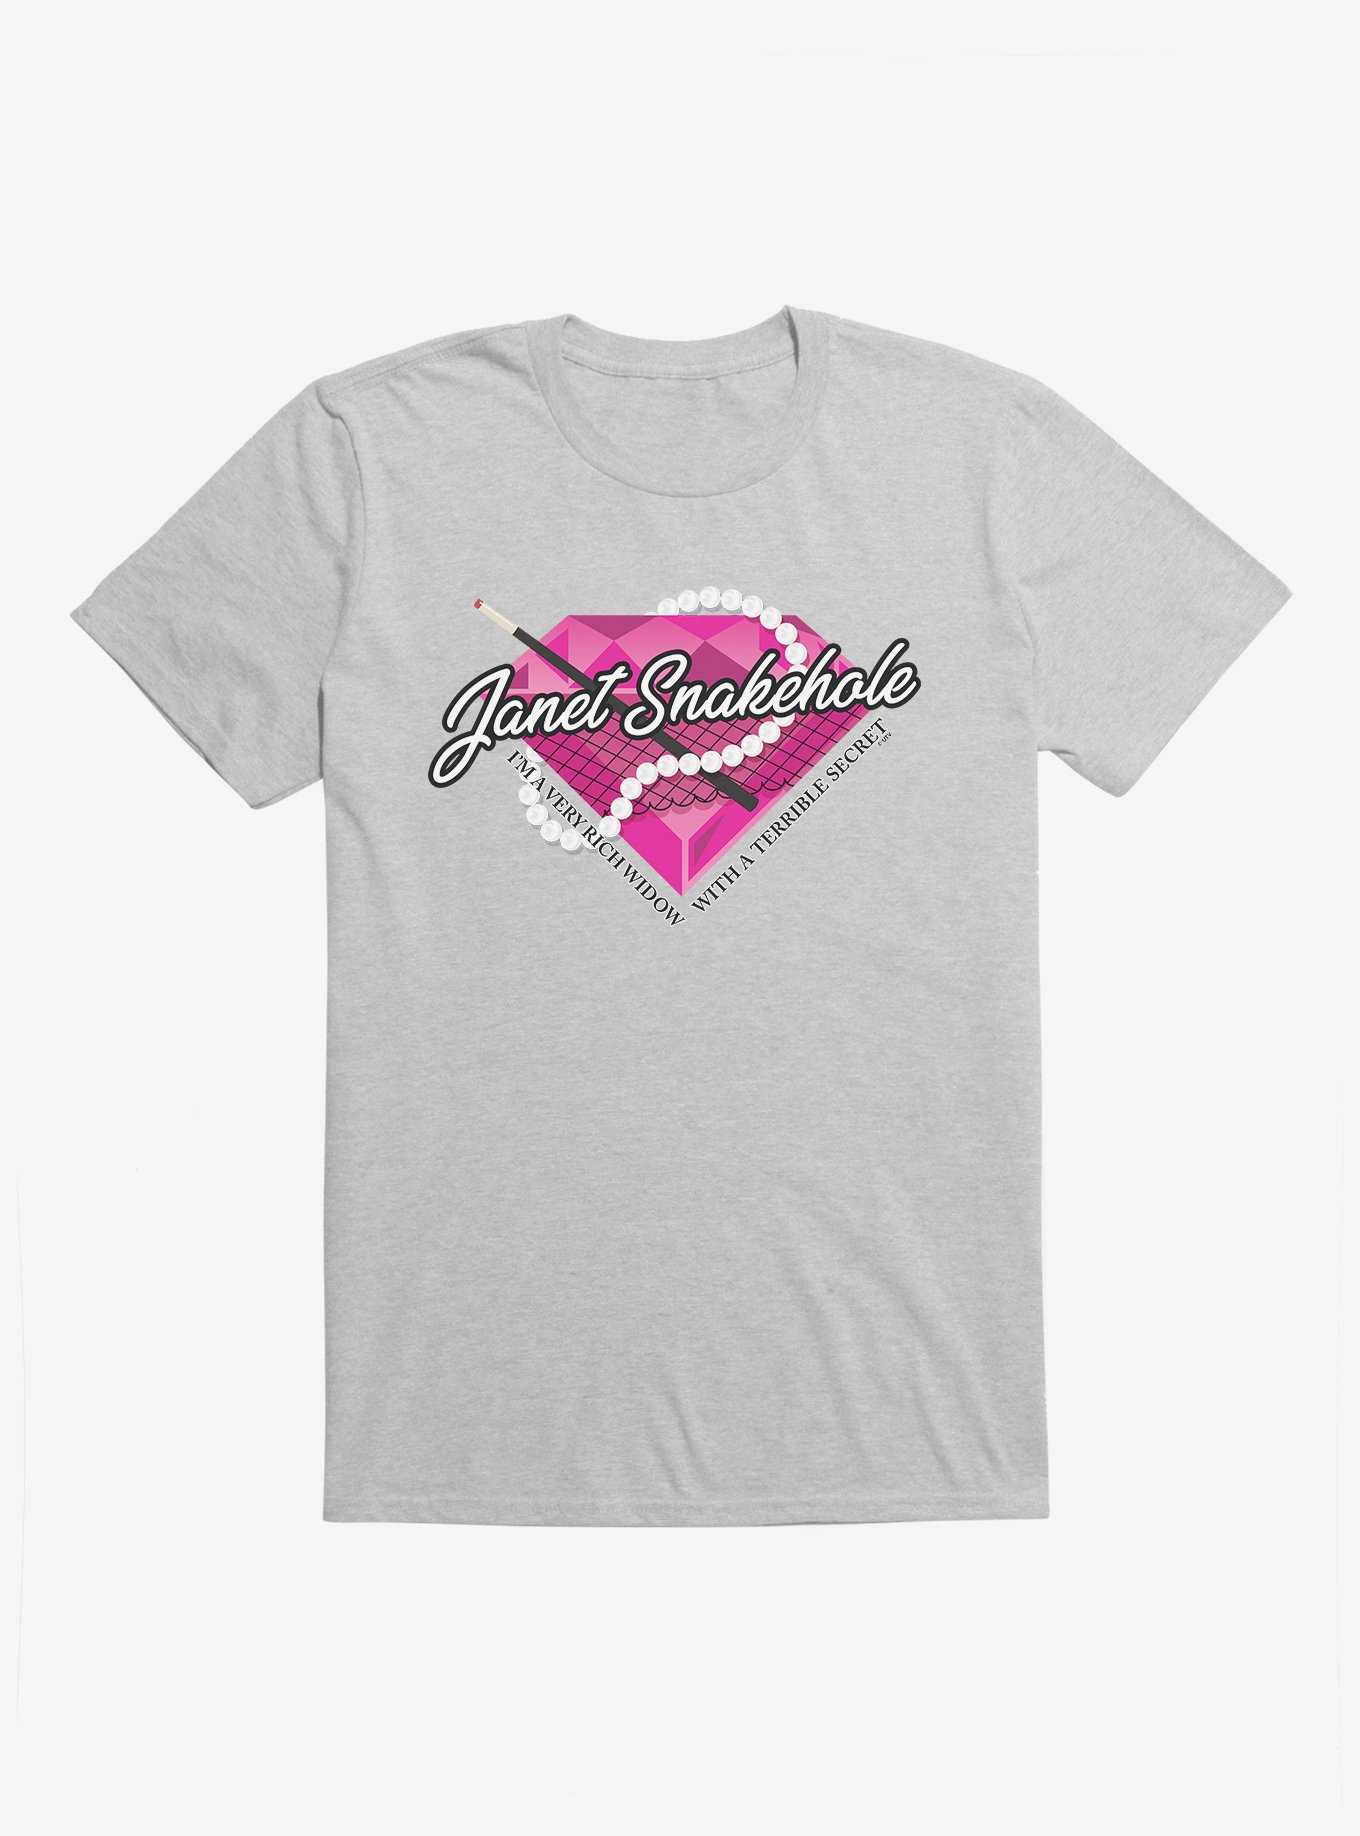 Parks And Recreation Janet Snakehole T-Shirt, , hi-res